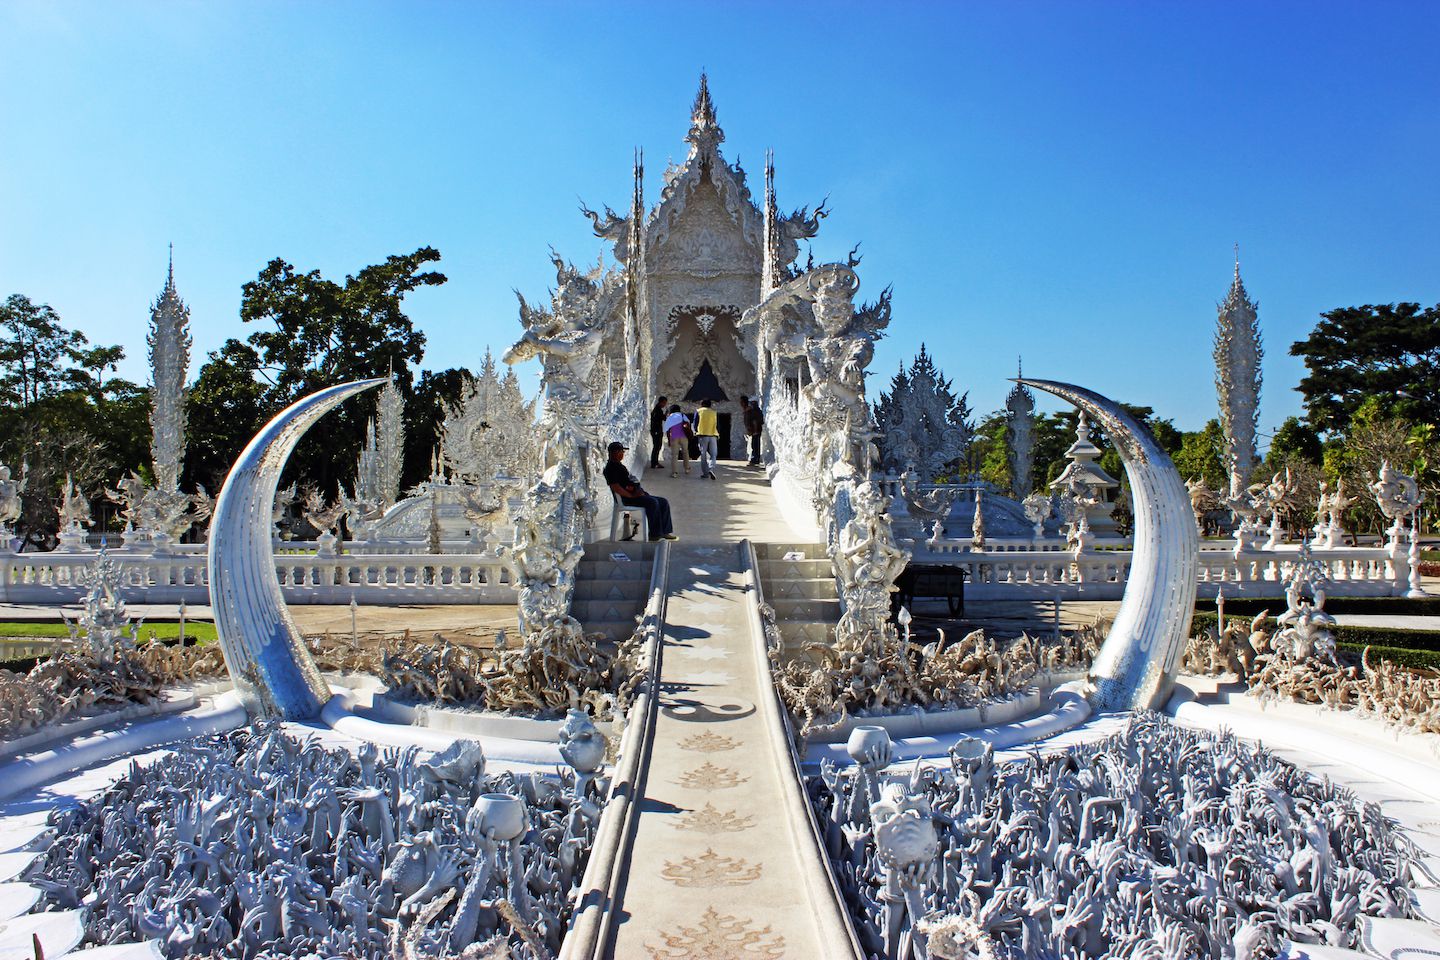 Bridge crossing the pond of the White Temple in Chiang Rai